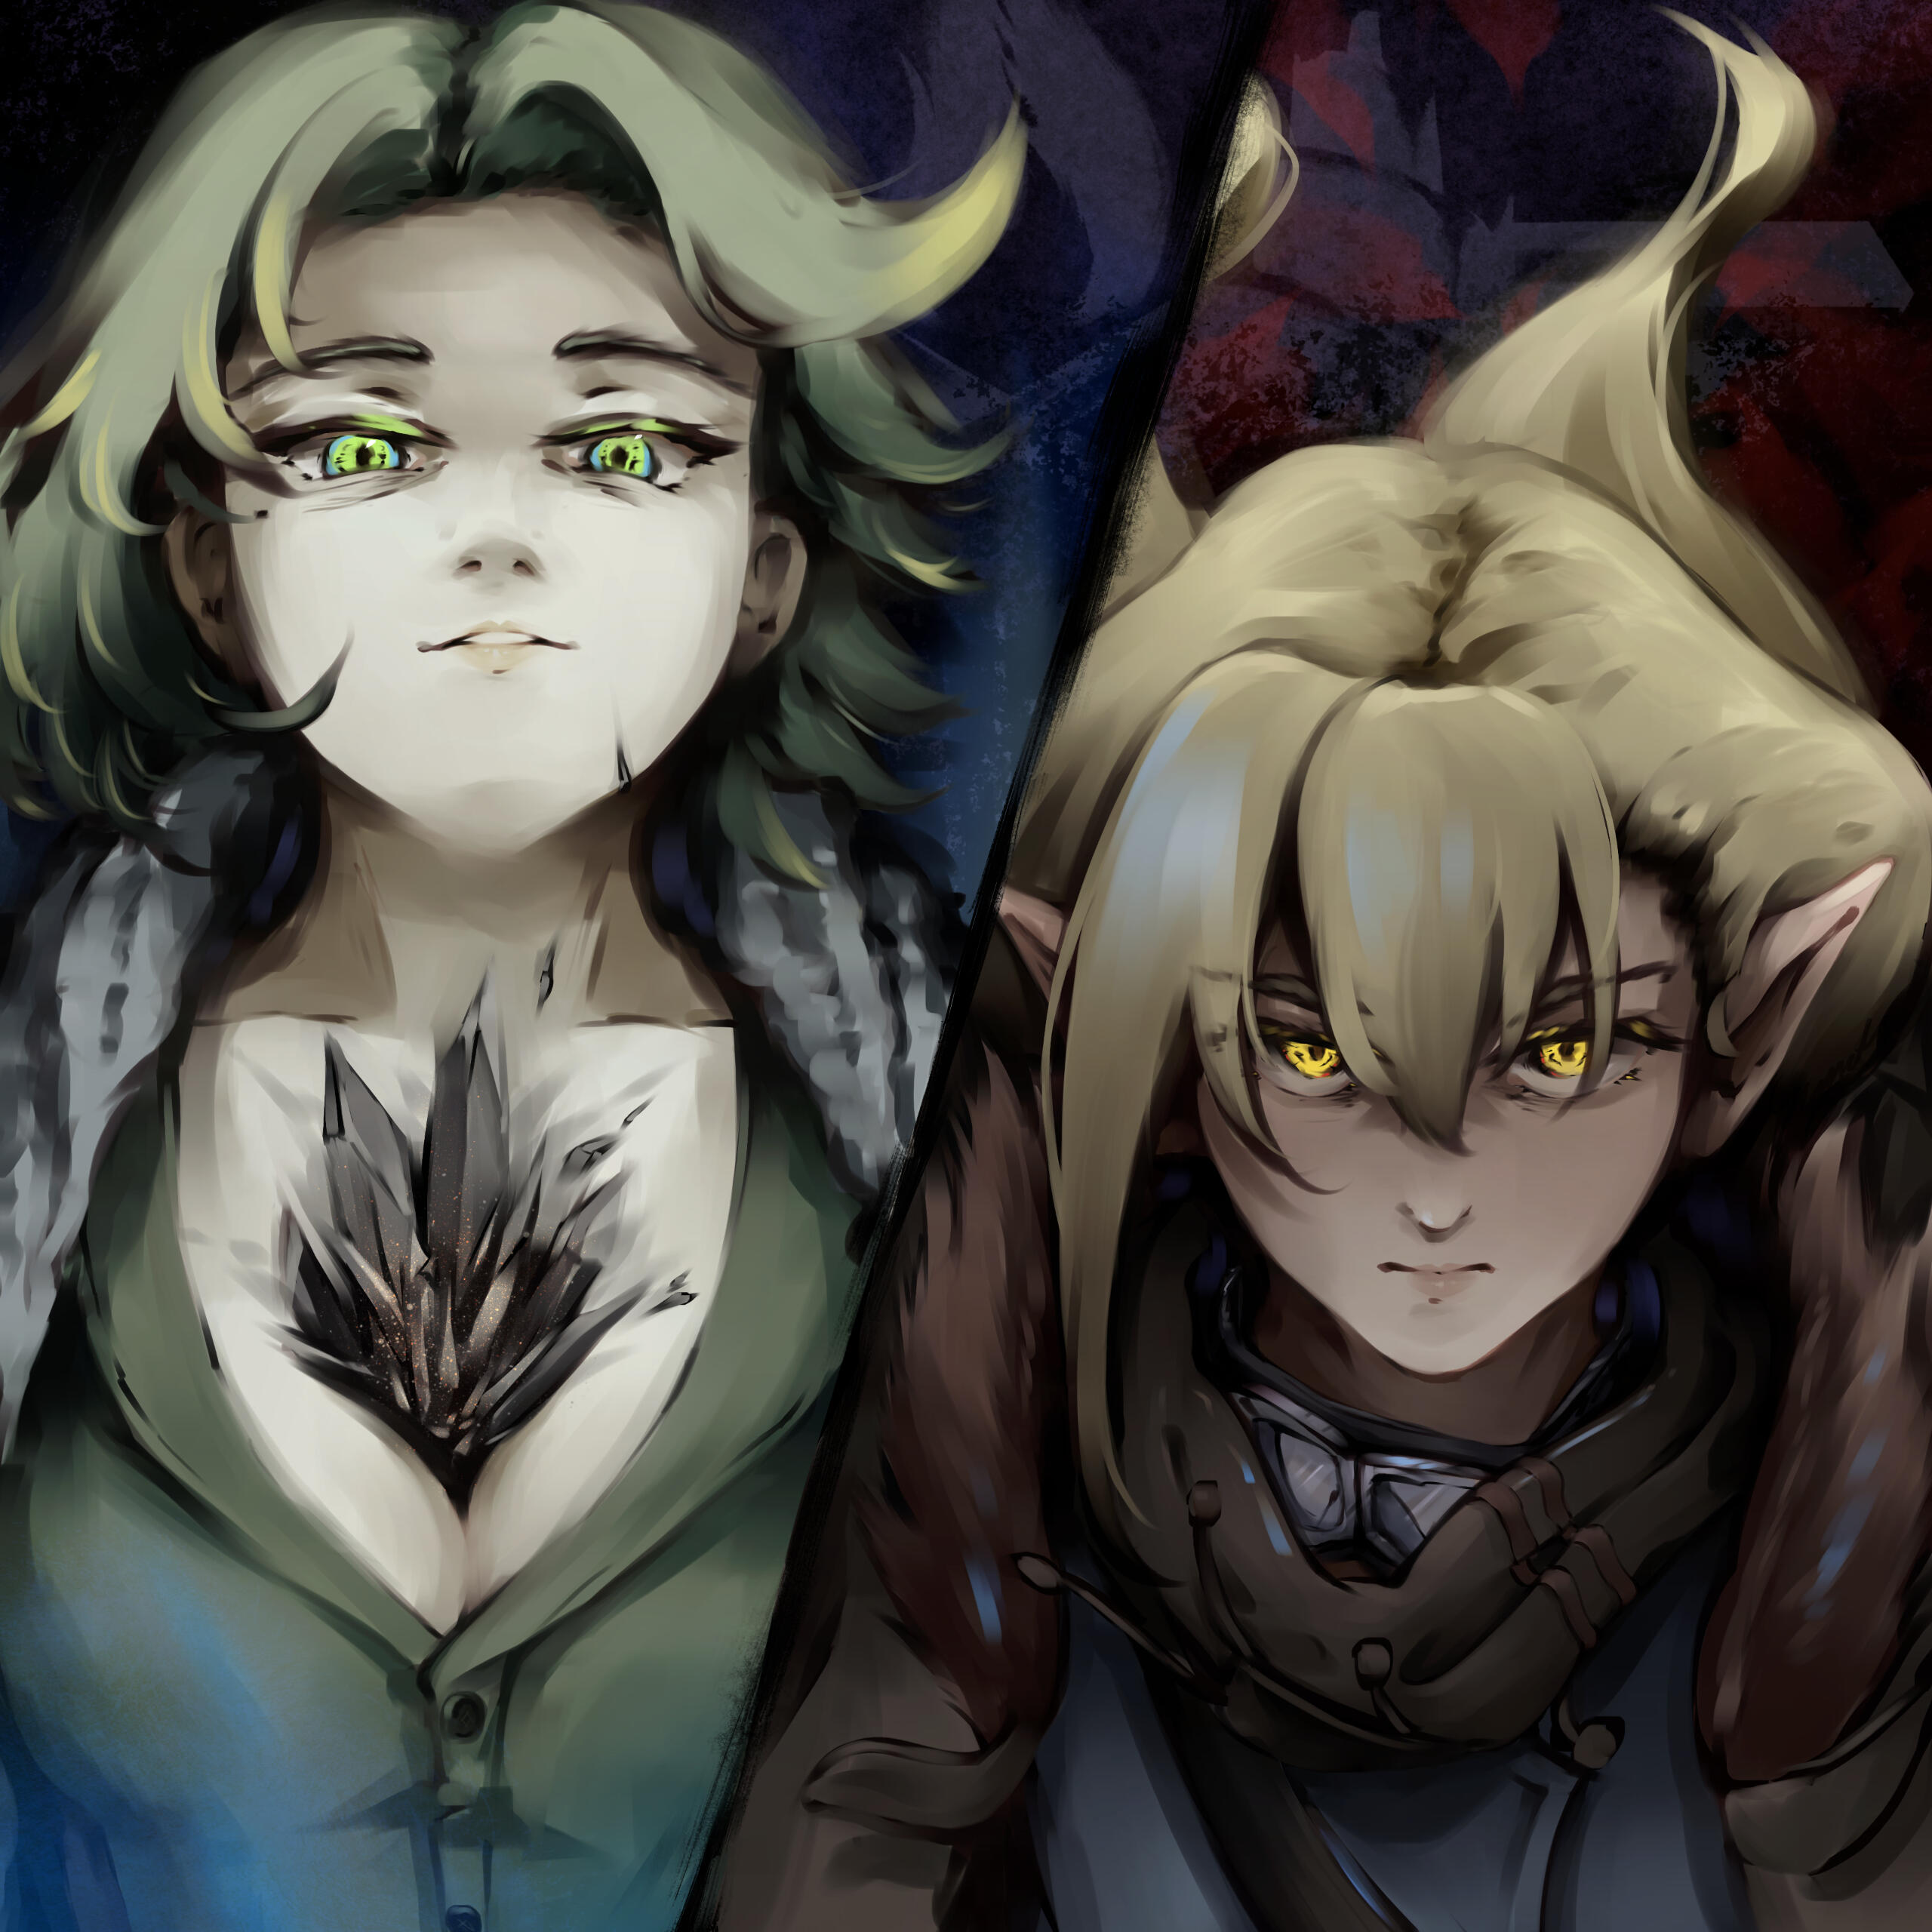 Digital art of (Cr,Fe)₂₃C₆ and ₁₆S from Aasgeist looking at each other in a split view composition. (Cr,Fe)₂₃C₆ looks angry while ₁₆S has a confident and smug smile, with her head high. In the background are the logos of their respective faction they lead.